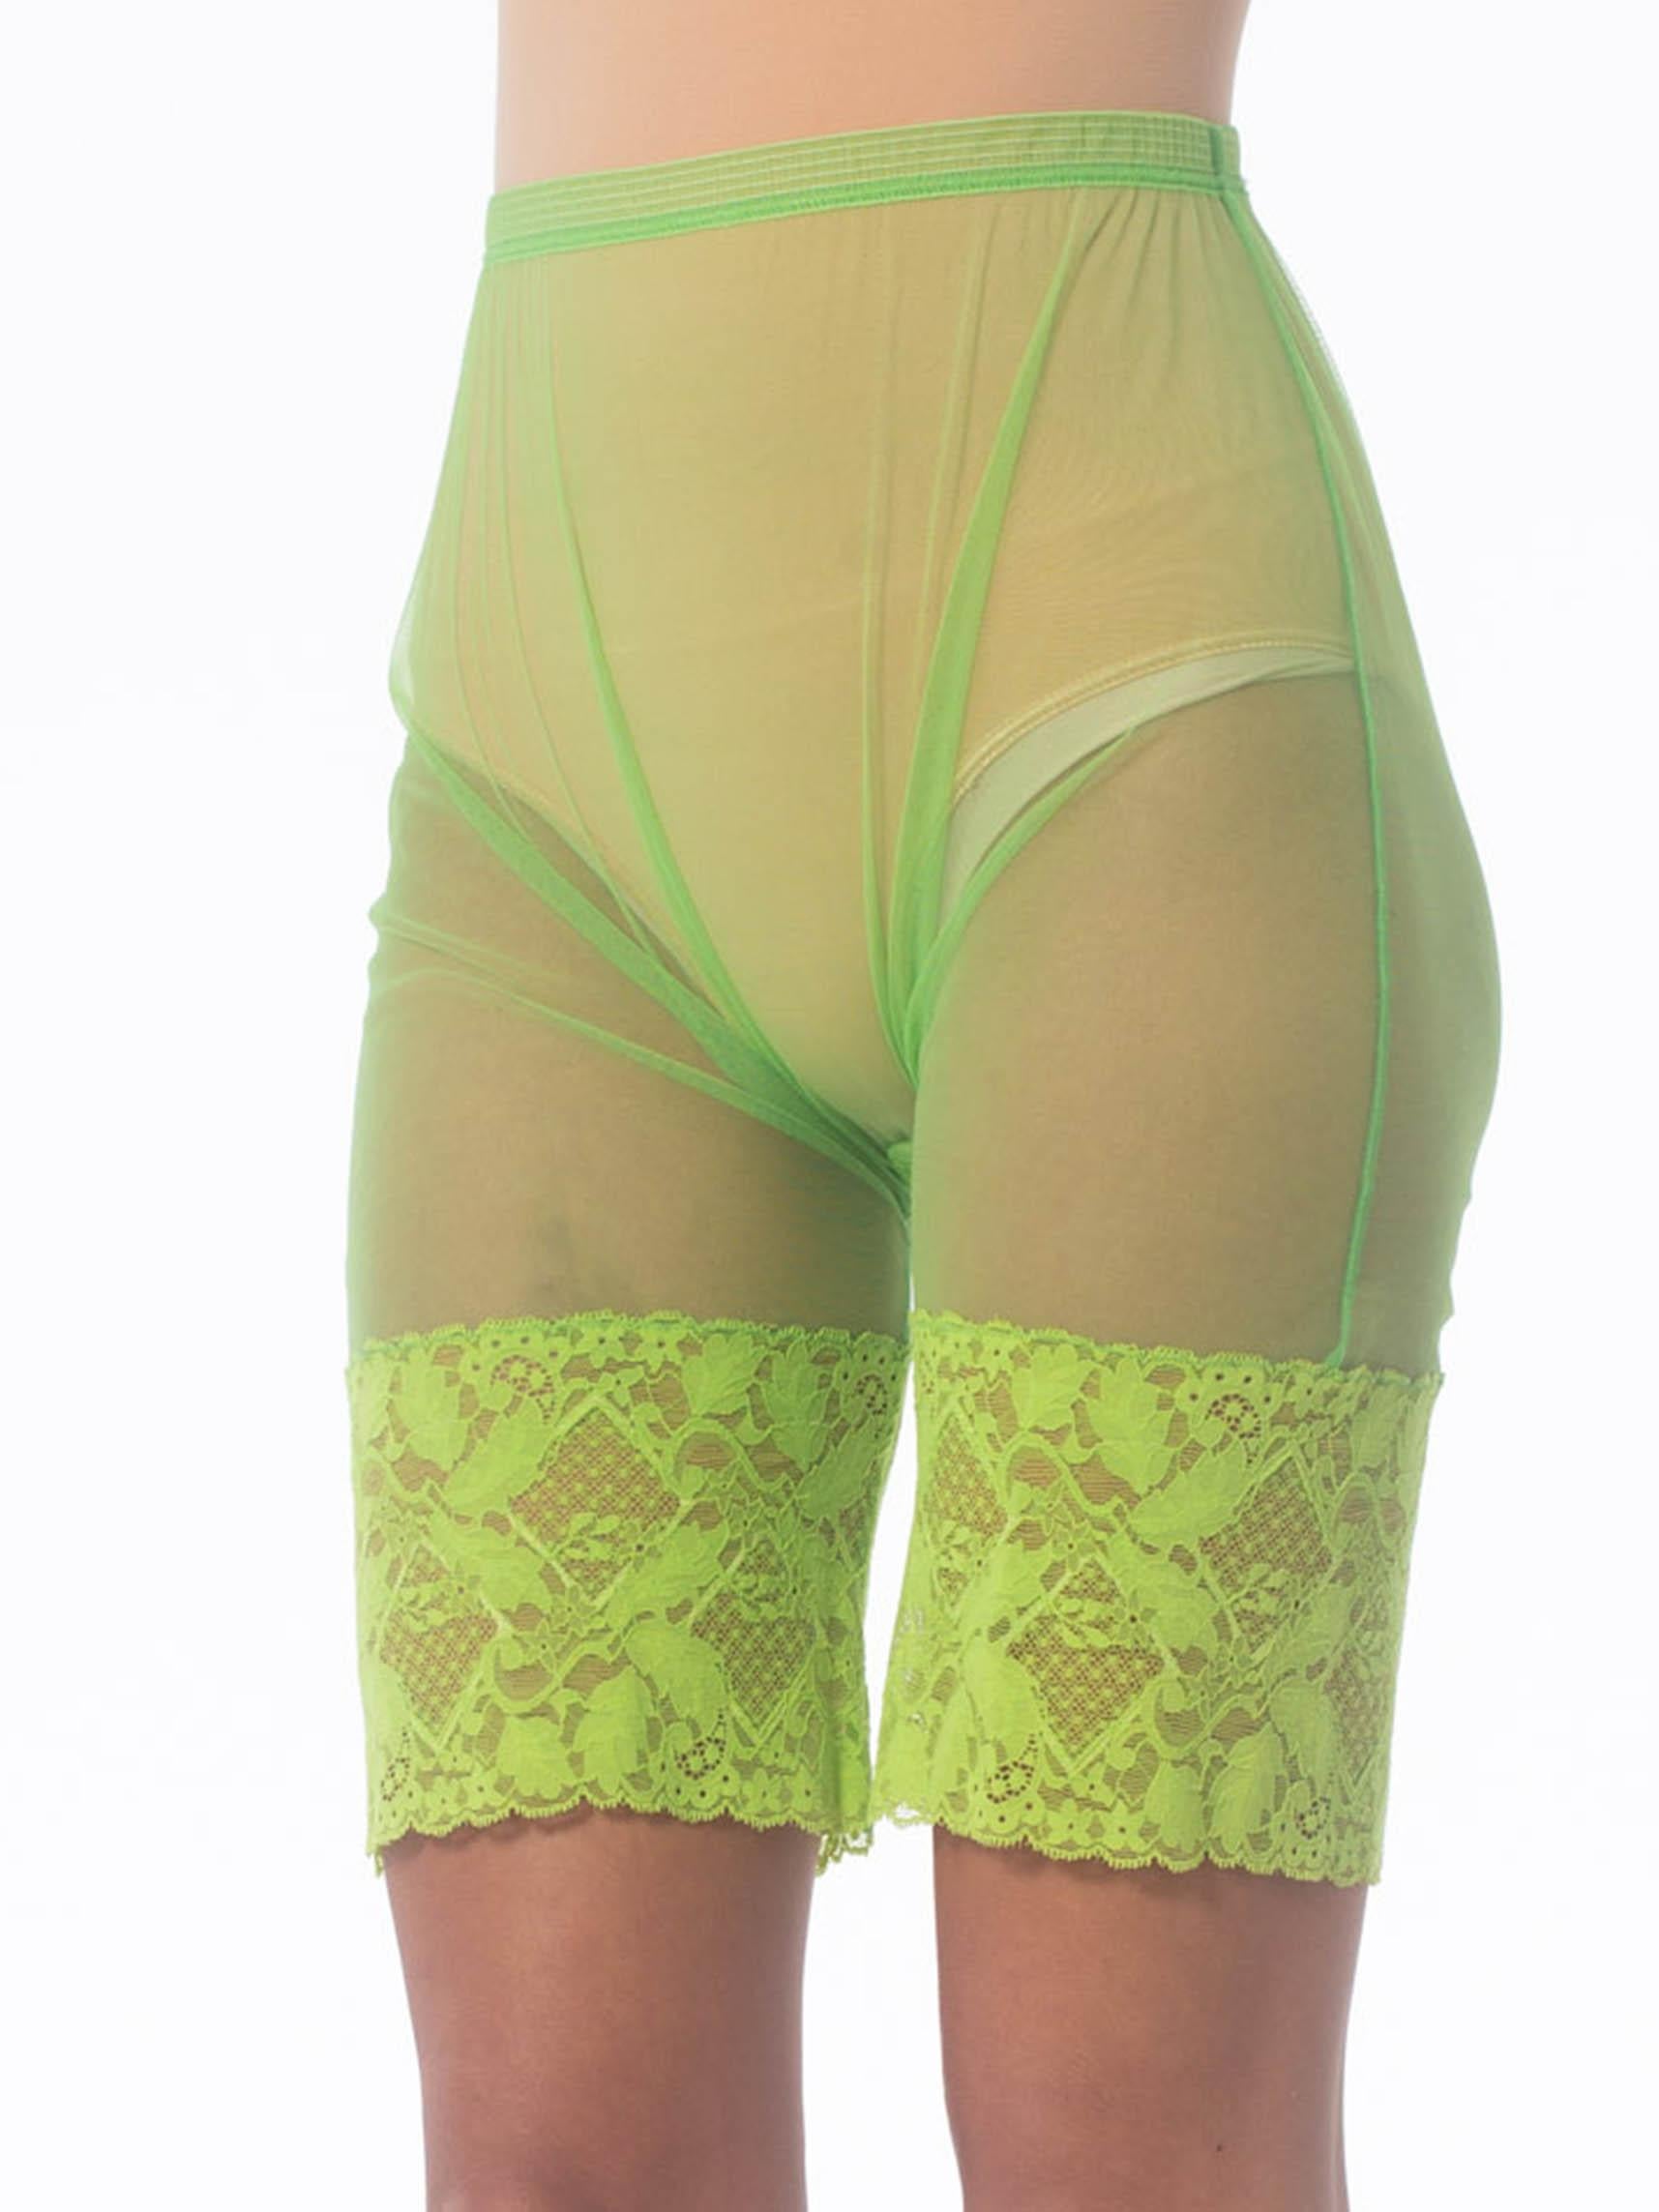 1990S GIANNI VERSACE Lime Green Nylon Net Sheer Bike Shorts With Lace Hem For Sale 1